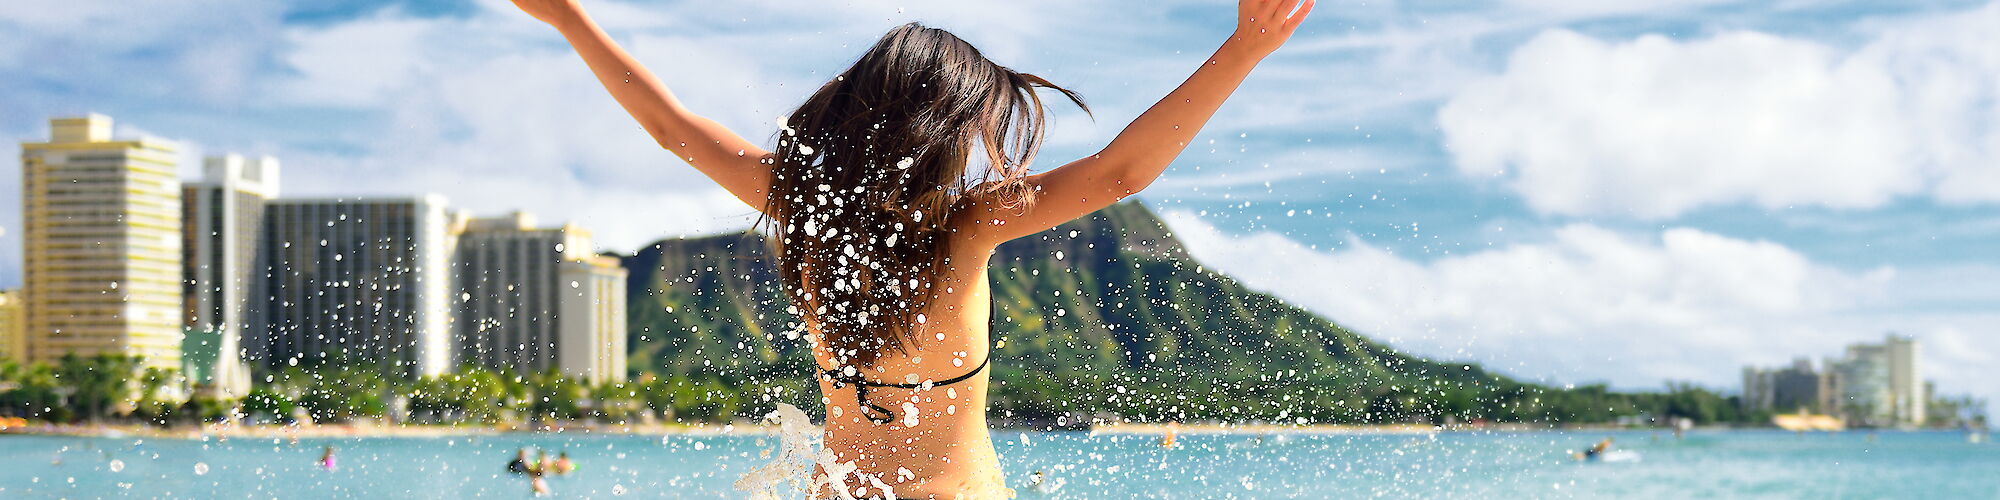 A person in a swimsuit is joyfully splashing in the ocean, with buildings, a mountain, and a bright blue sky in the background.